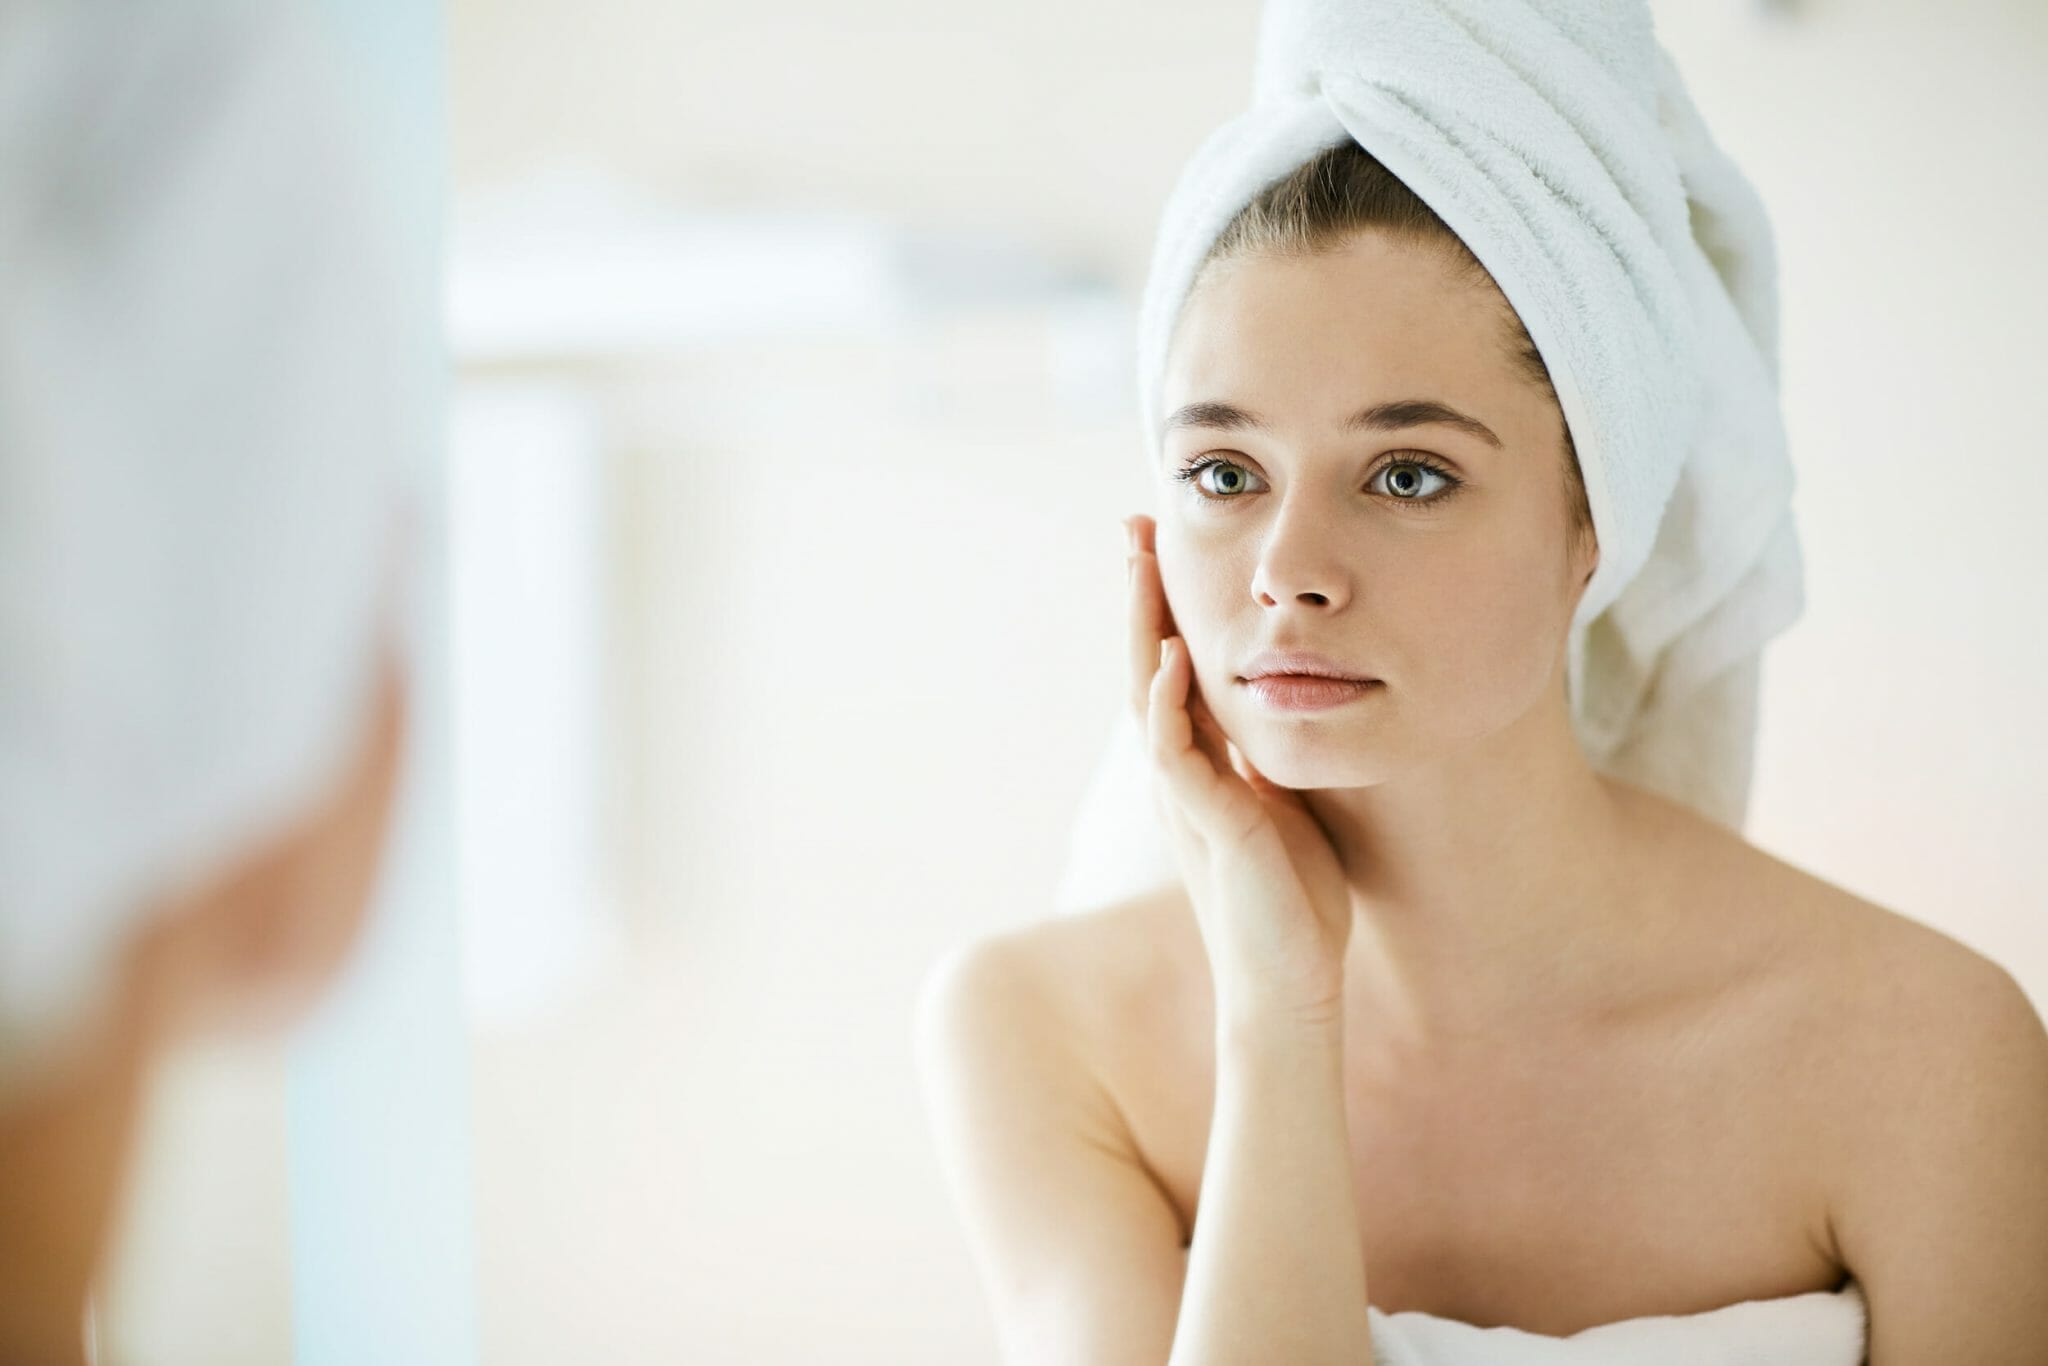 Young woman looking in mirror after bath or shower